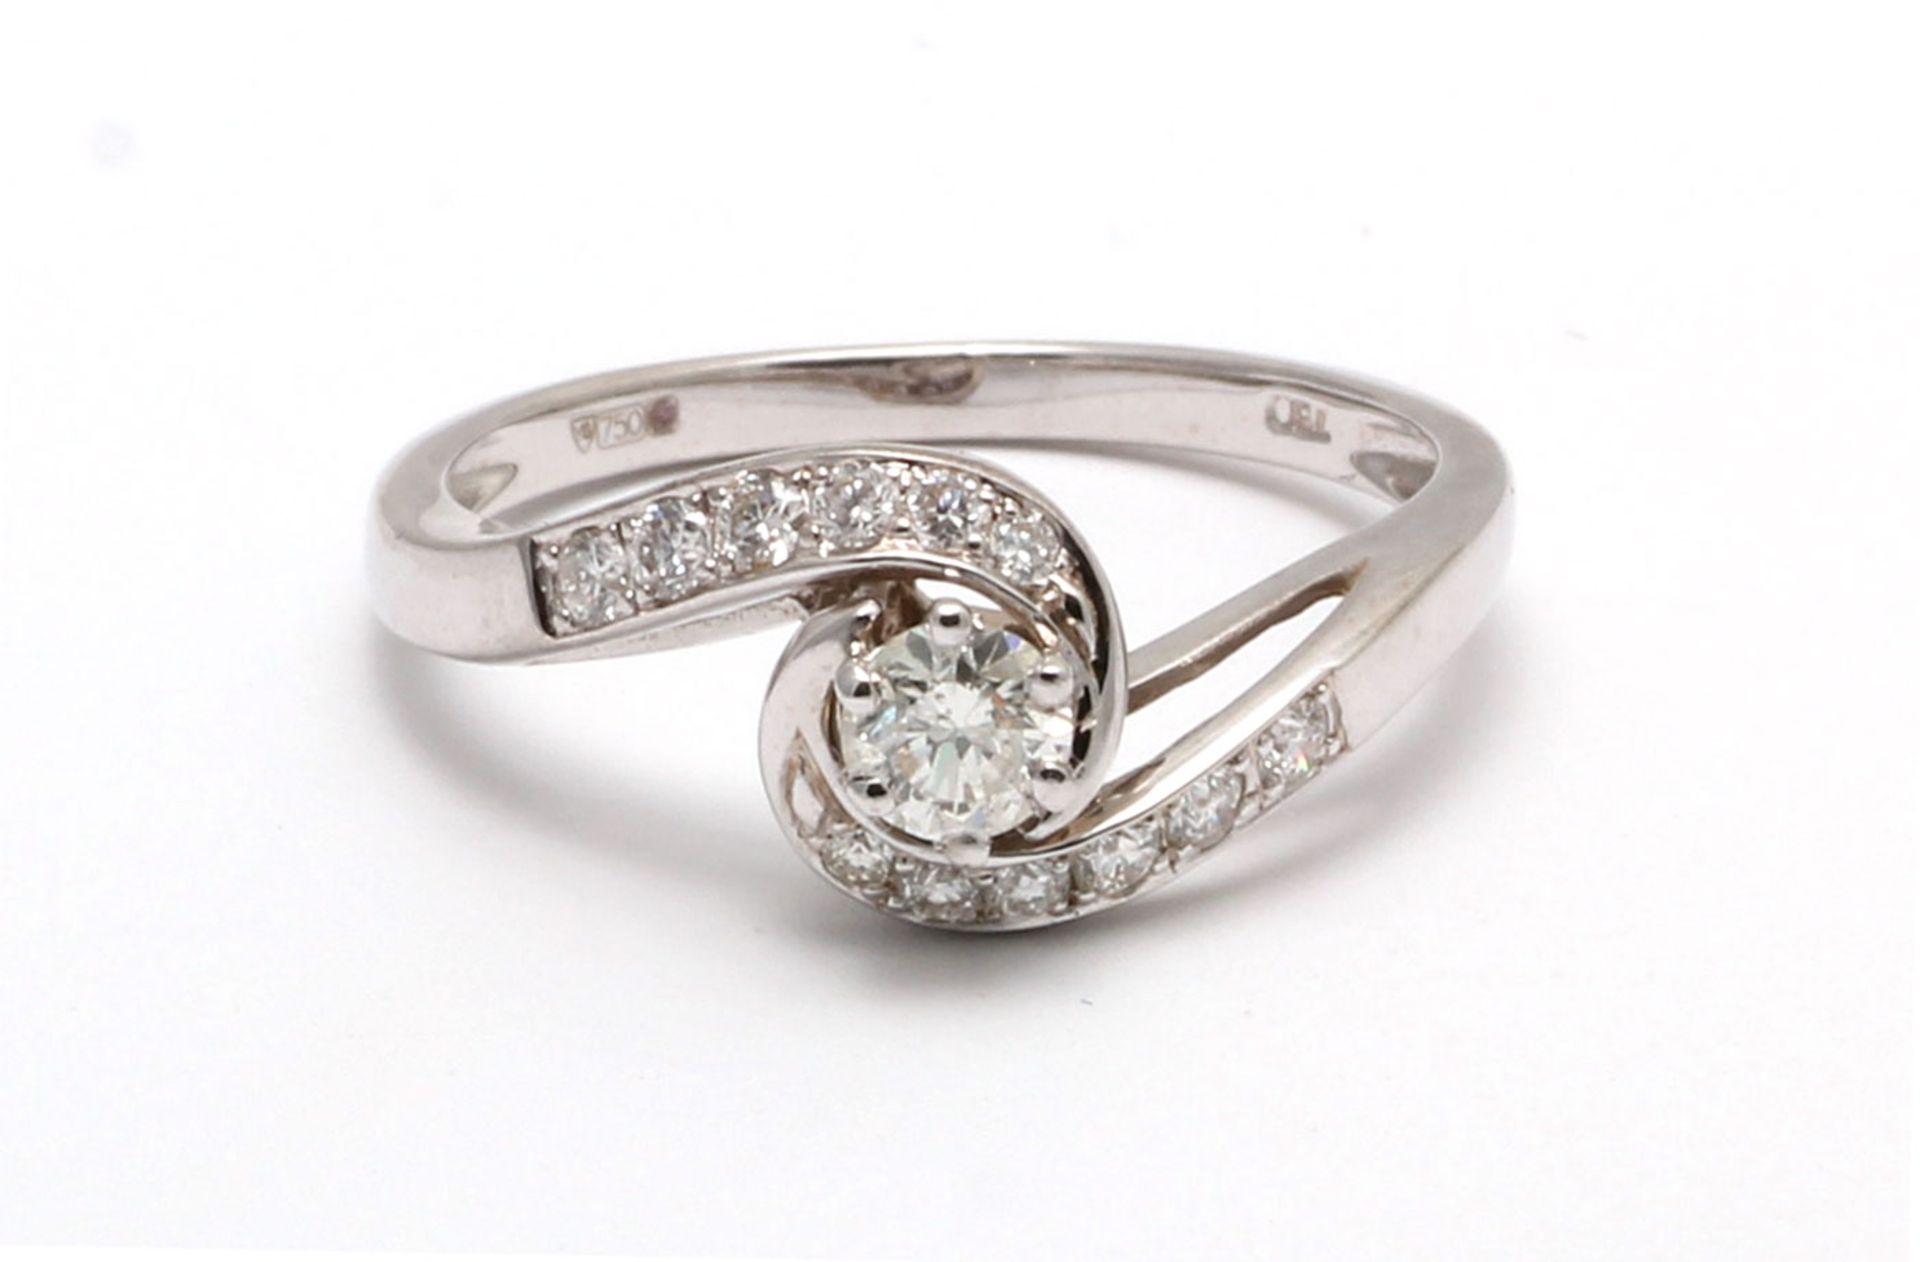 18ct White Gold Prong Set Diamond Ring 0.57 Carats - Valued By GIE £6,320.00 - A beautiful round